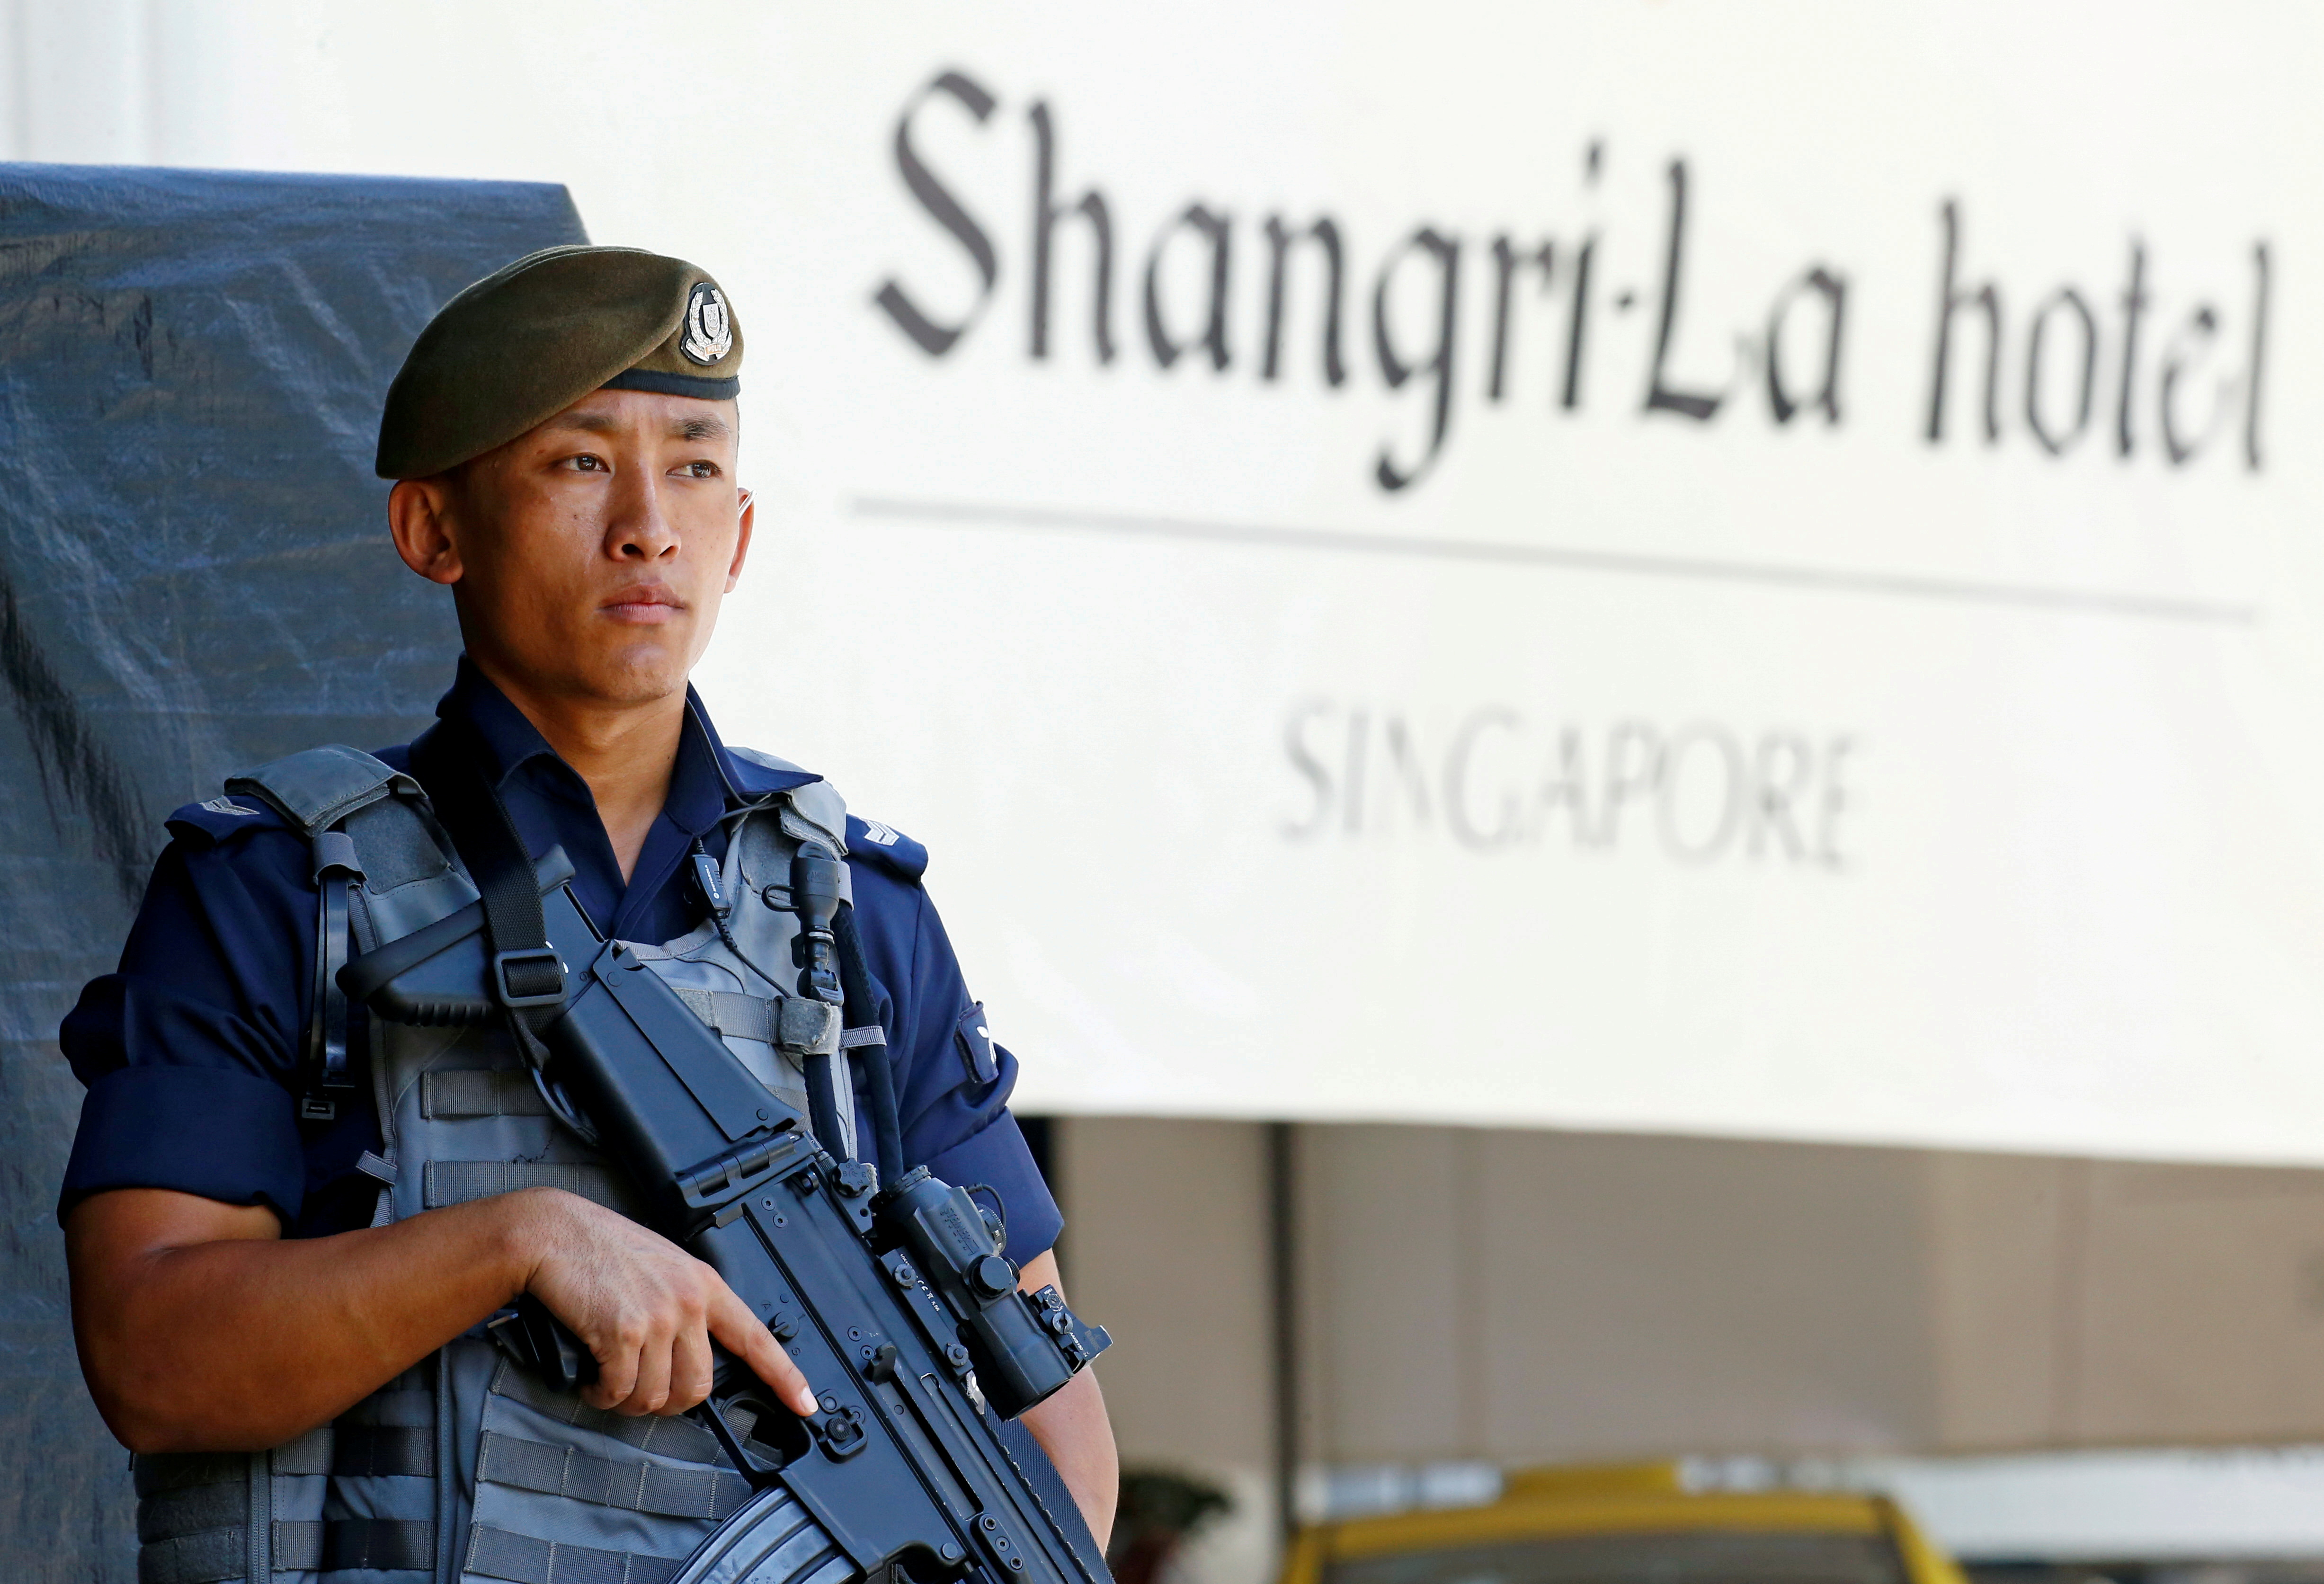 A Gurkha police officer stands guard outside the venue of the IISS Shangri-La Dialogue in Singapore